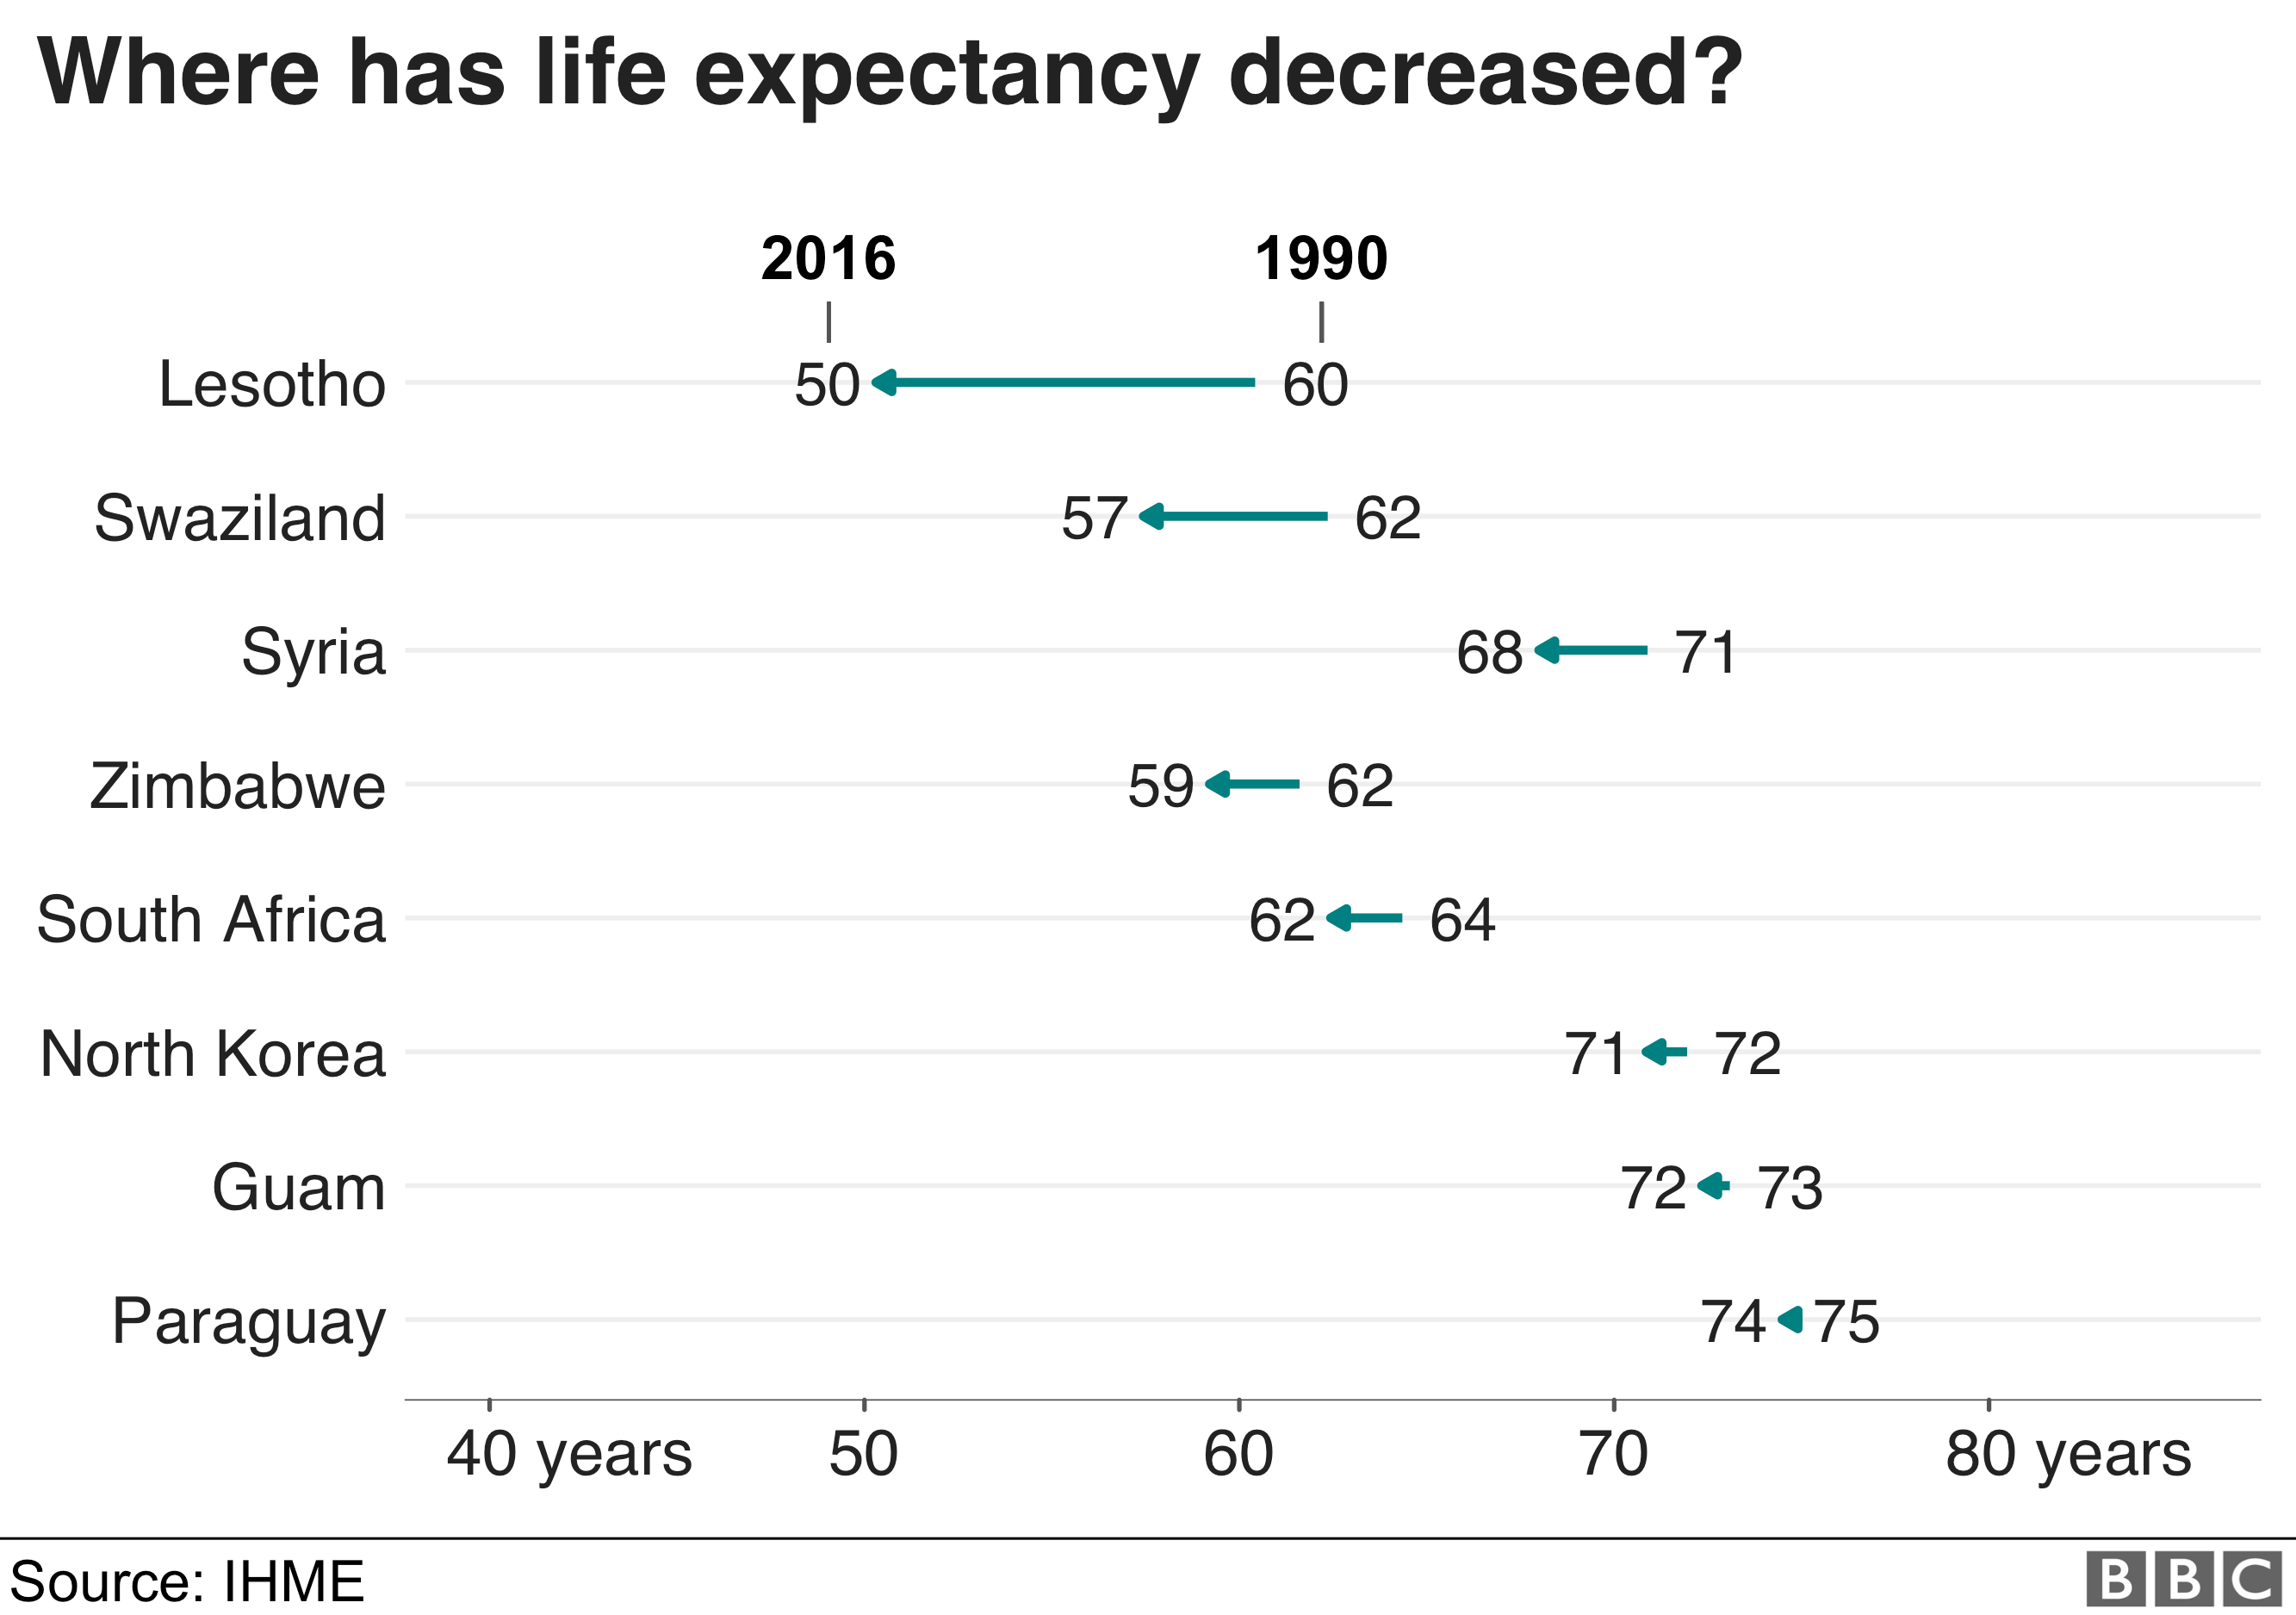 Life expectancy has decreased most from 1990 in Lesotho, where it went down 10 years from 60 to 50